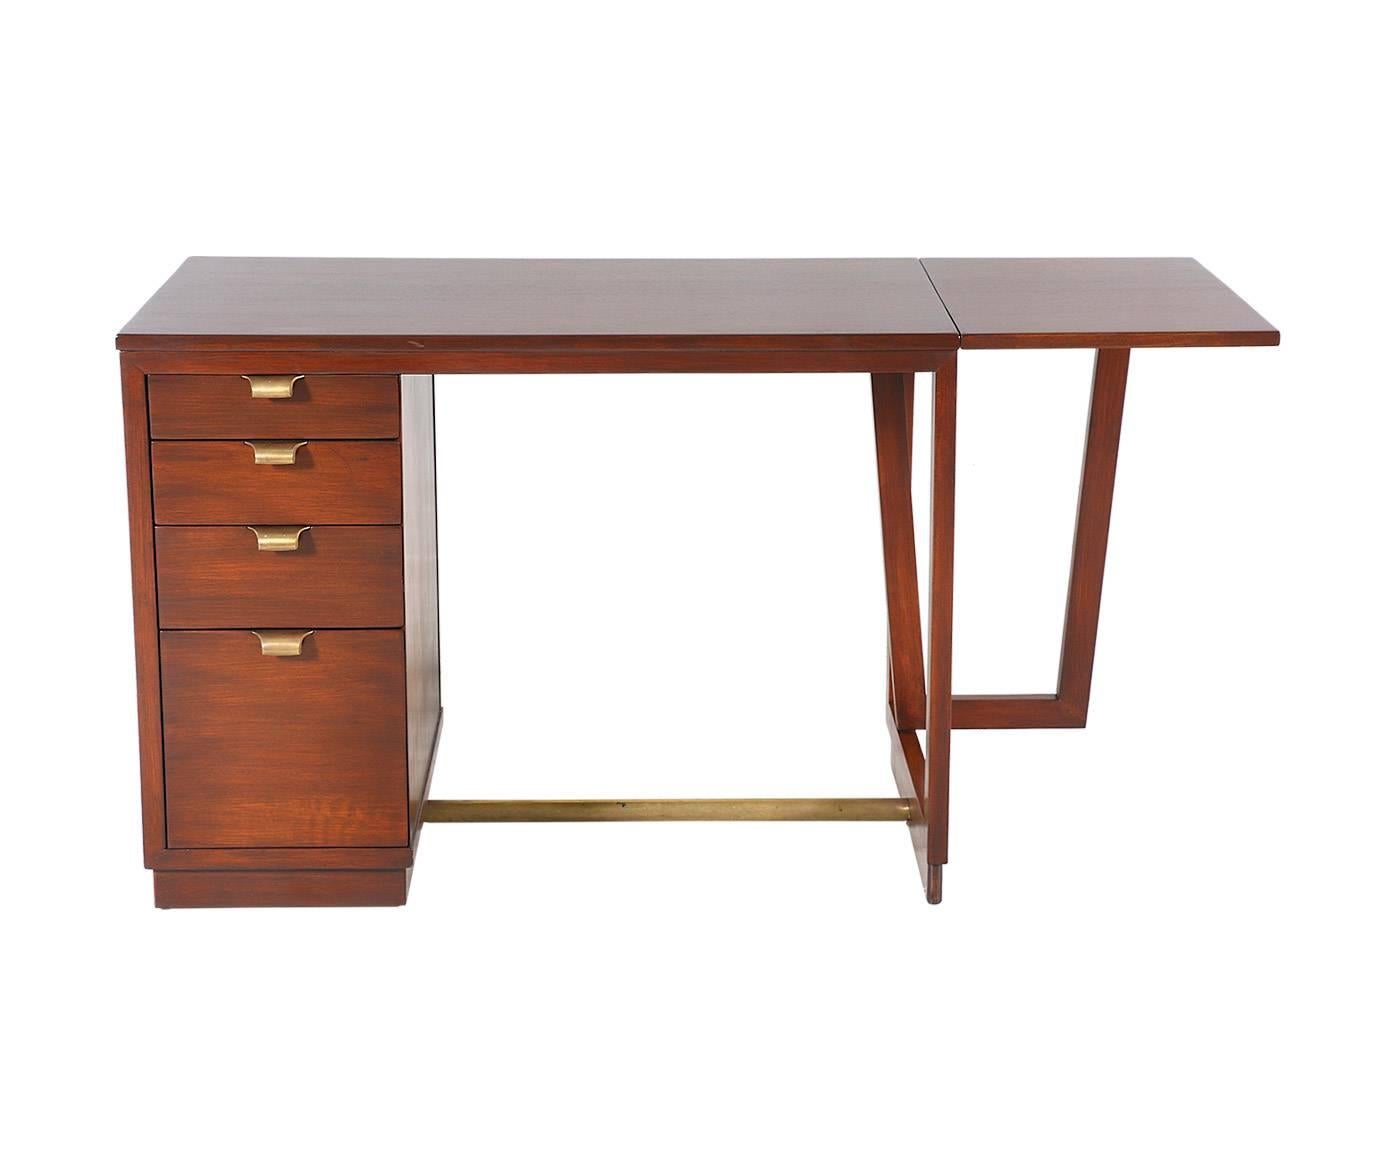 Designer: Edward J. Wormley.
Manufacturer: Drexel “Precedent”.
Period/Style: Mid-Century Modern.
Country: United States.
Date: 1940s.

Dimensions: 30″ H x 40″ W x 22″ D.
Extension: 15″.
Total extension 55″.
Materials: Elmwood stained